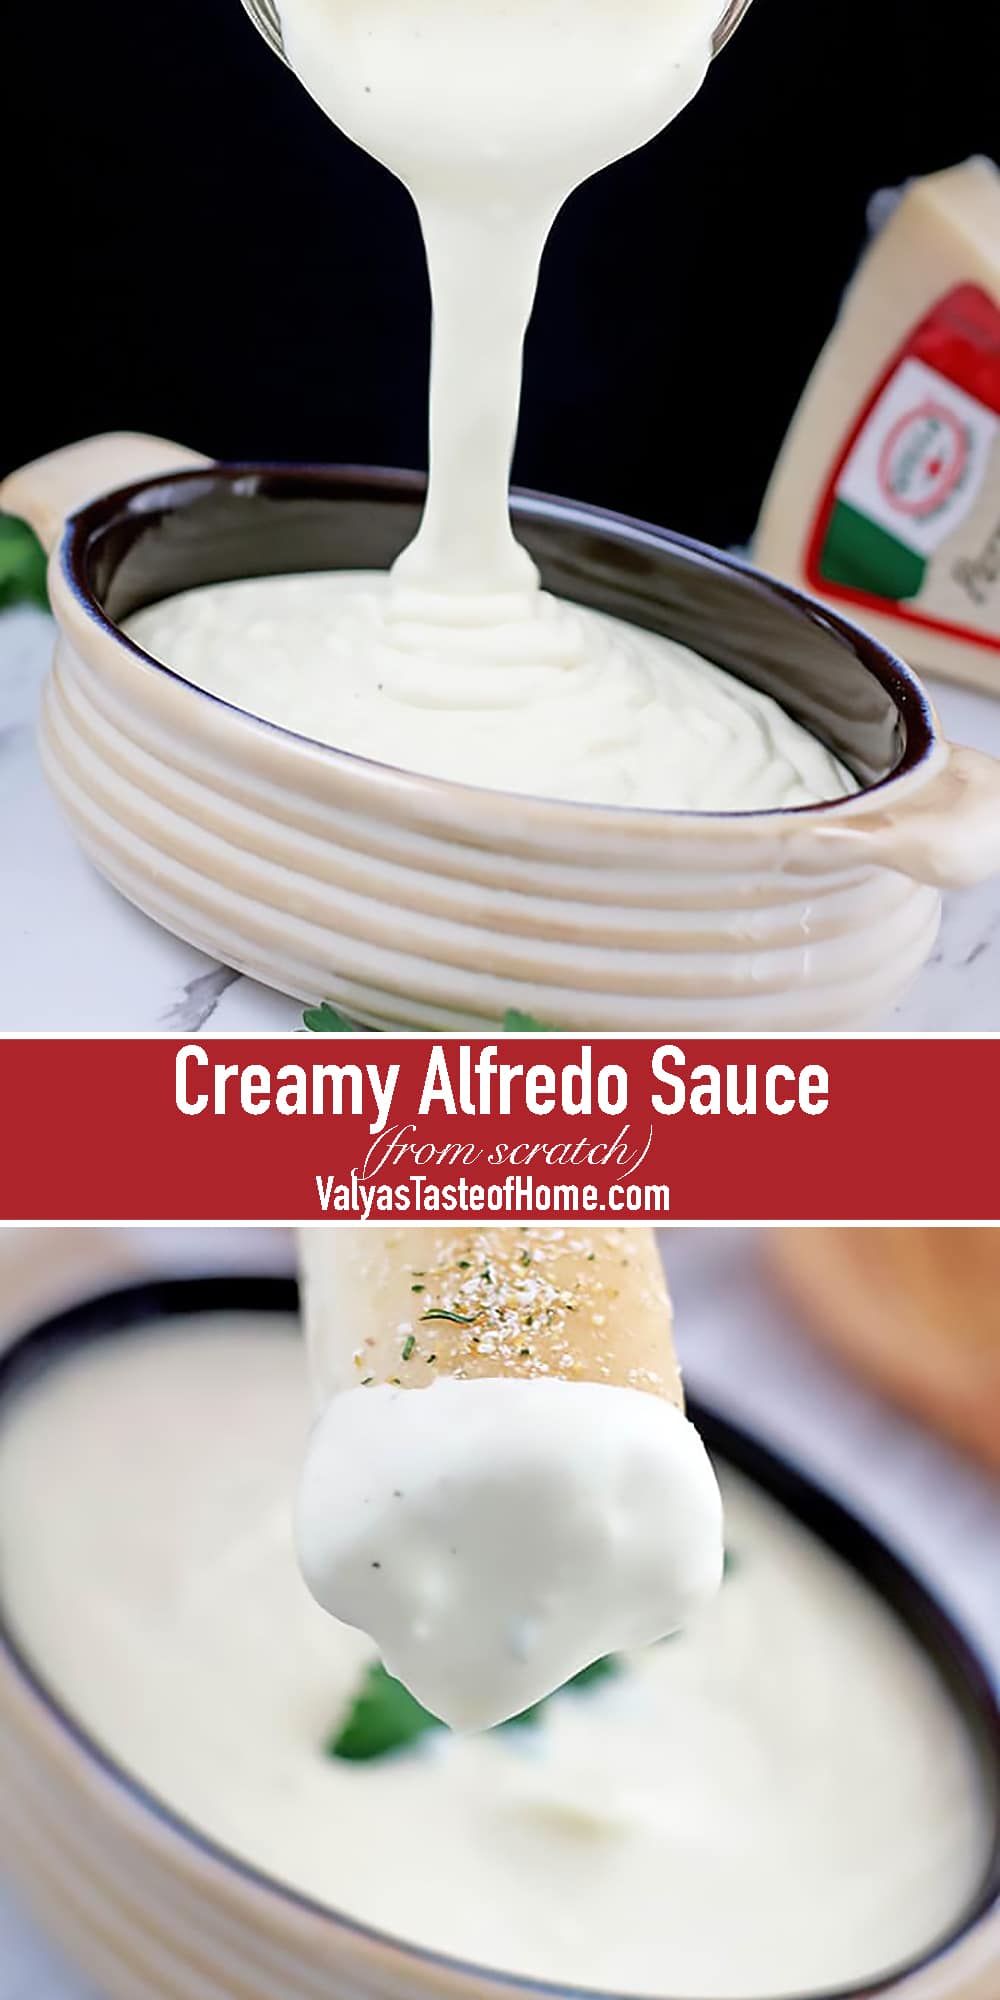 This Homemade Creamy Alfredo Sauce Recipe is very rich, creamy, and full of robust of that Alfredo flavor.